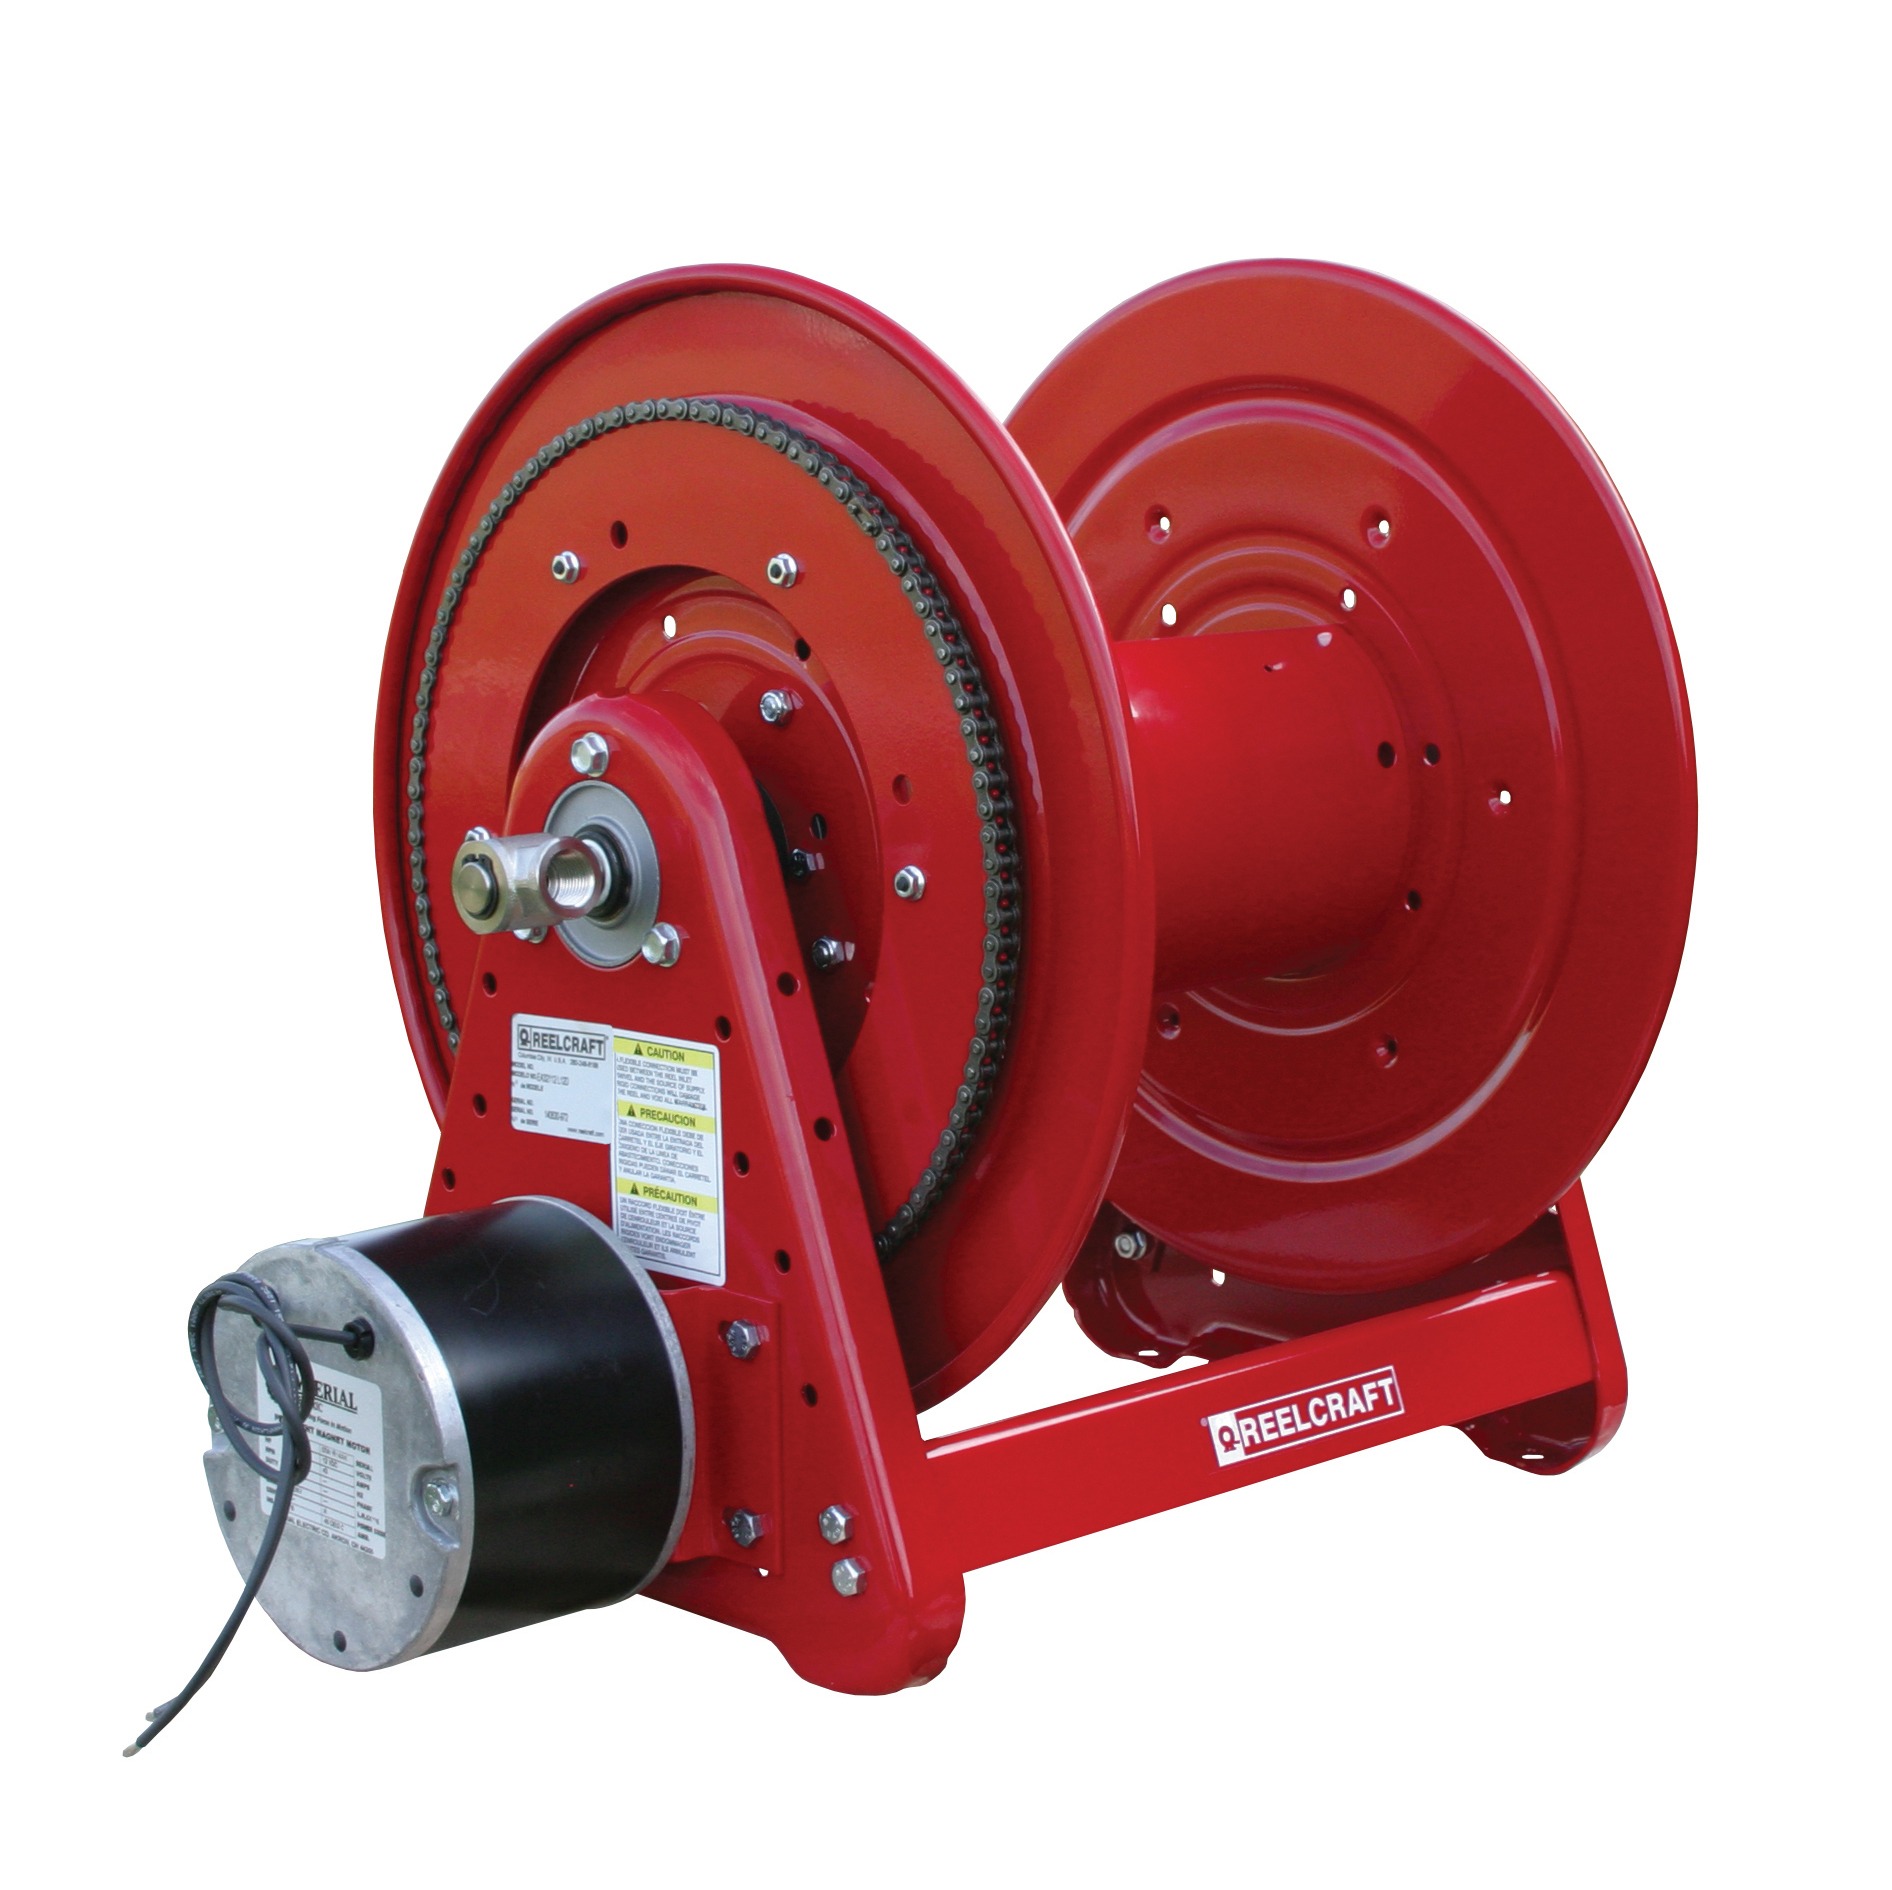 Reelcraft EH37112 M24D 1 in. x 50 ft. Heavy Duty 24 V DC Motor Driven Hose Reel